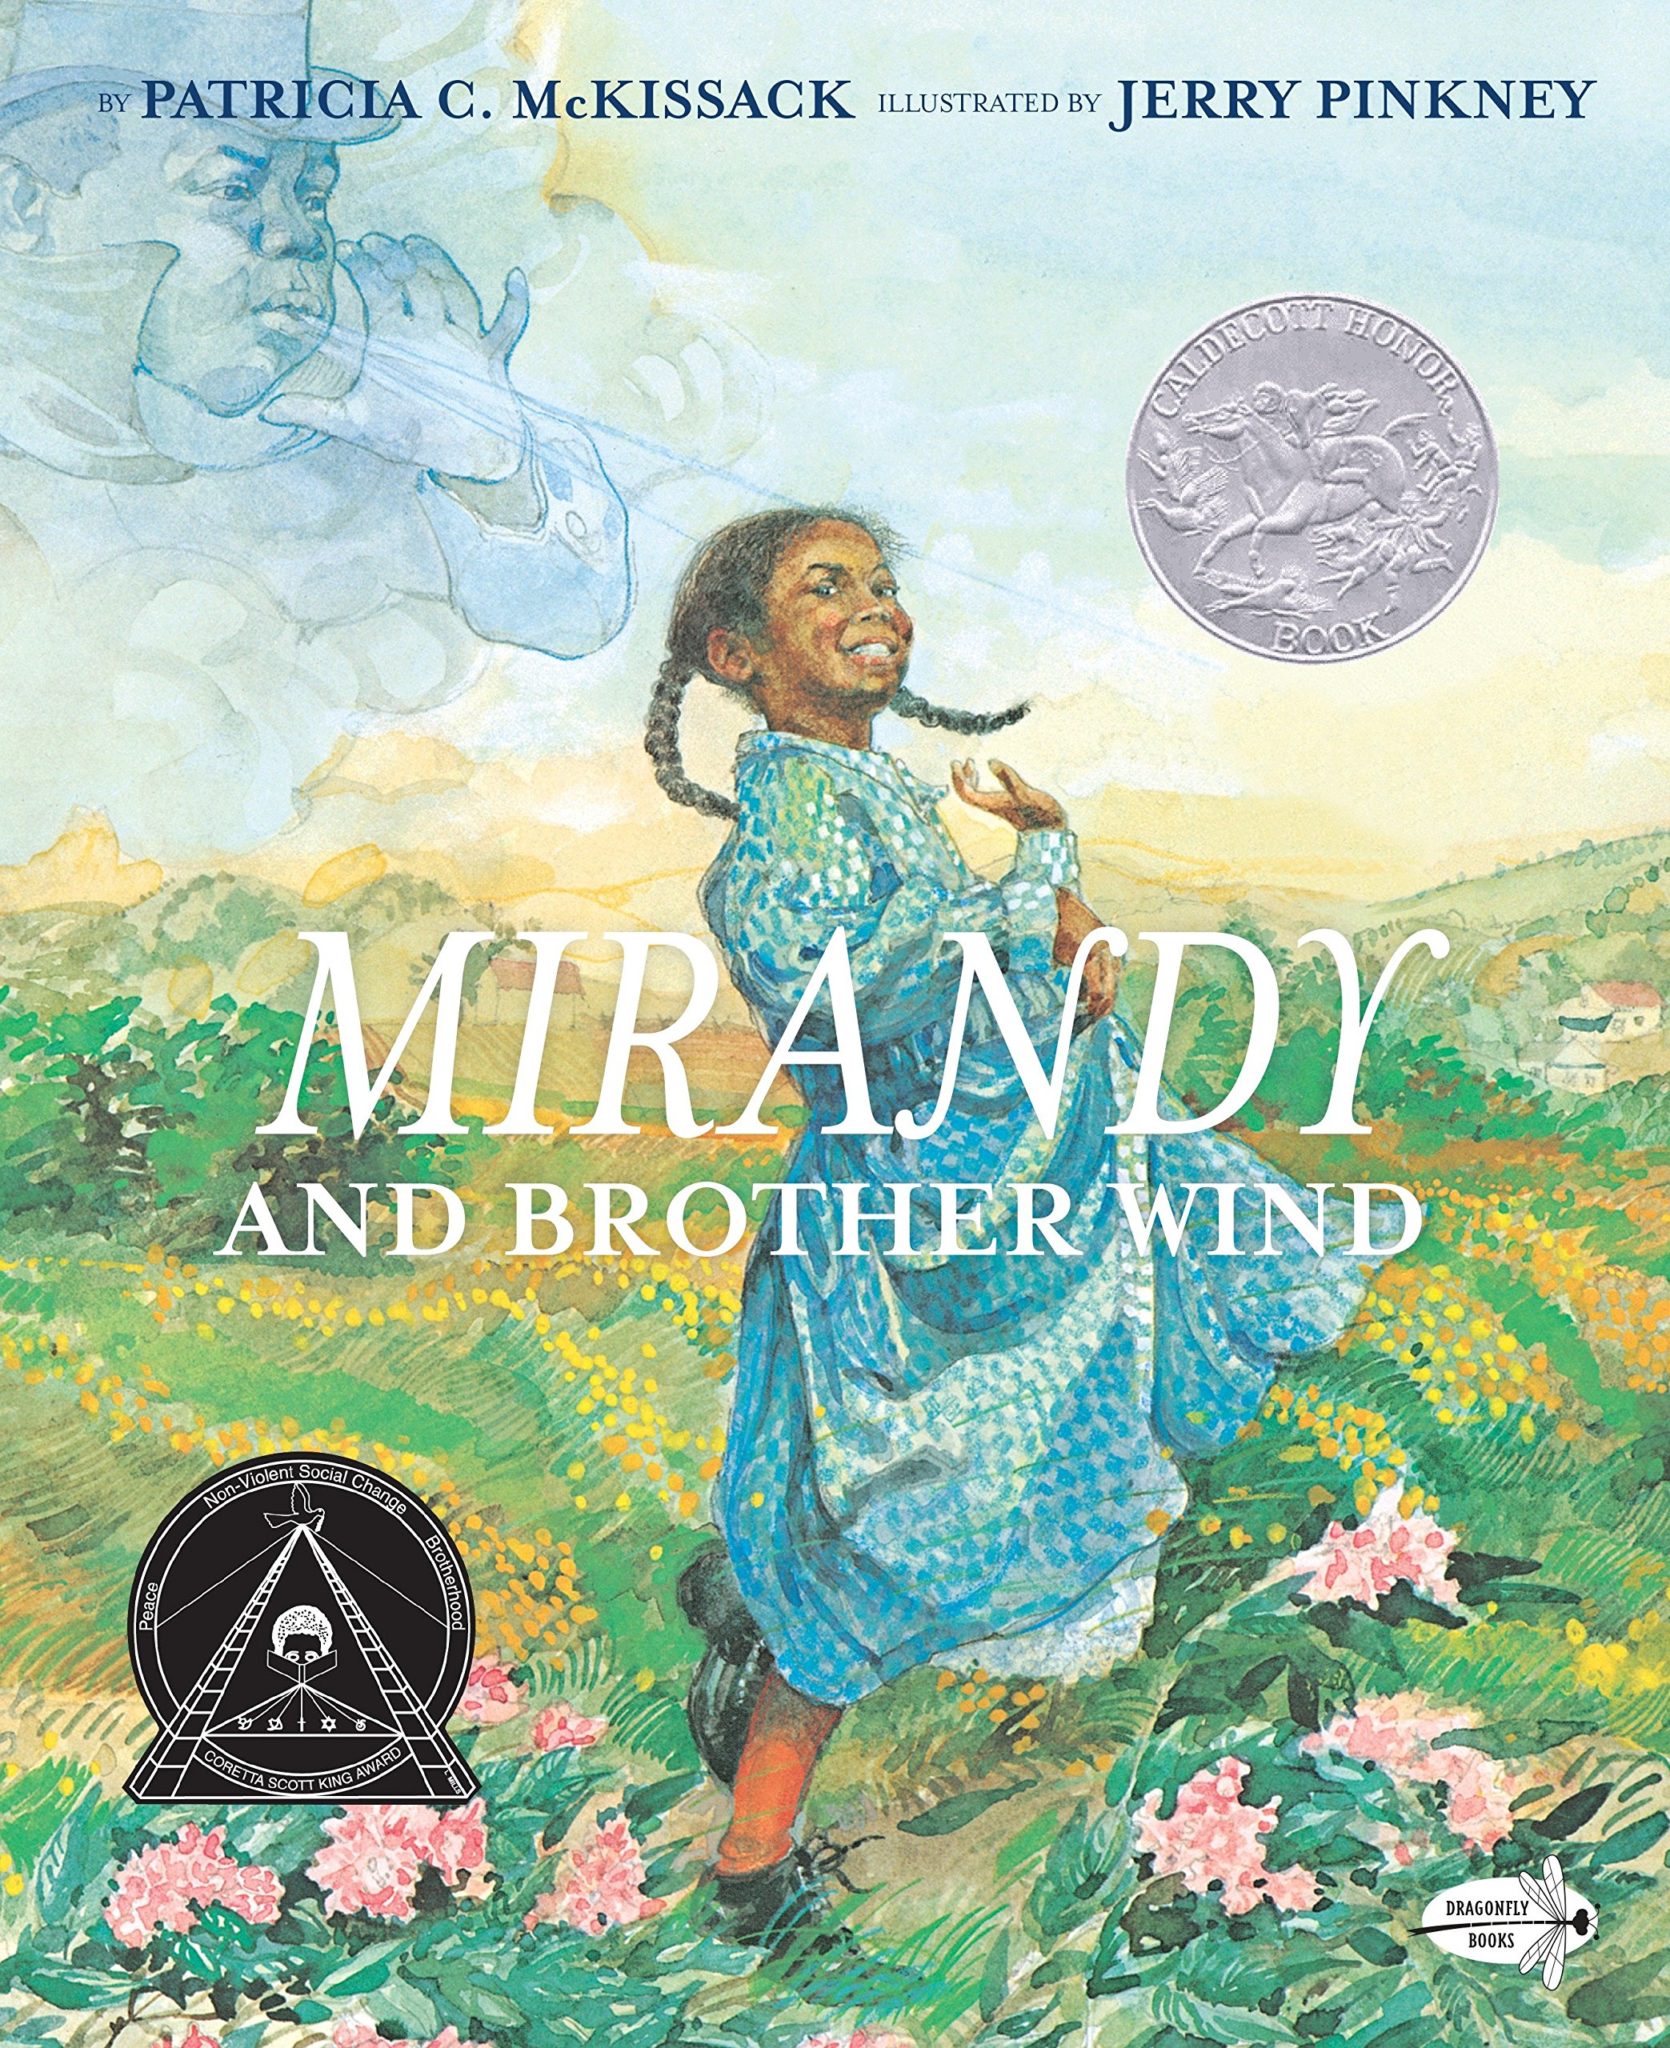 Cover of Mirandy and Brother Wind, featuring a watercolor illustration of Mirandy, a young Black girl in a blue and white speckled dress. Mirandy is smiling in a field of wild flowers while Brother Wind, depicted as a transparent Black man in a top hat and suit jacket, blows from the sky behind Mirandy.